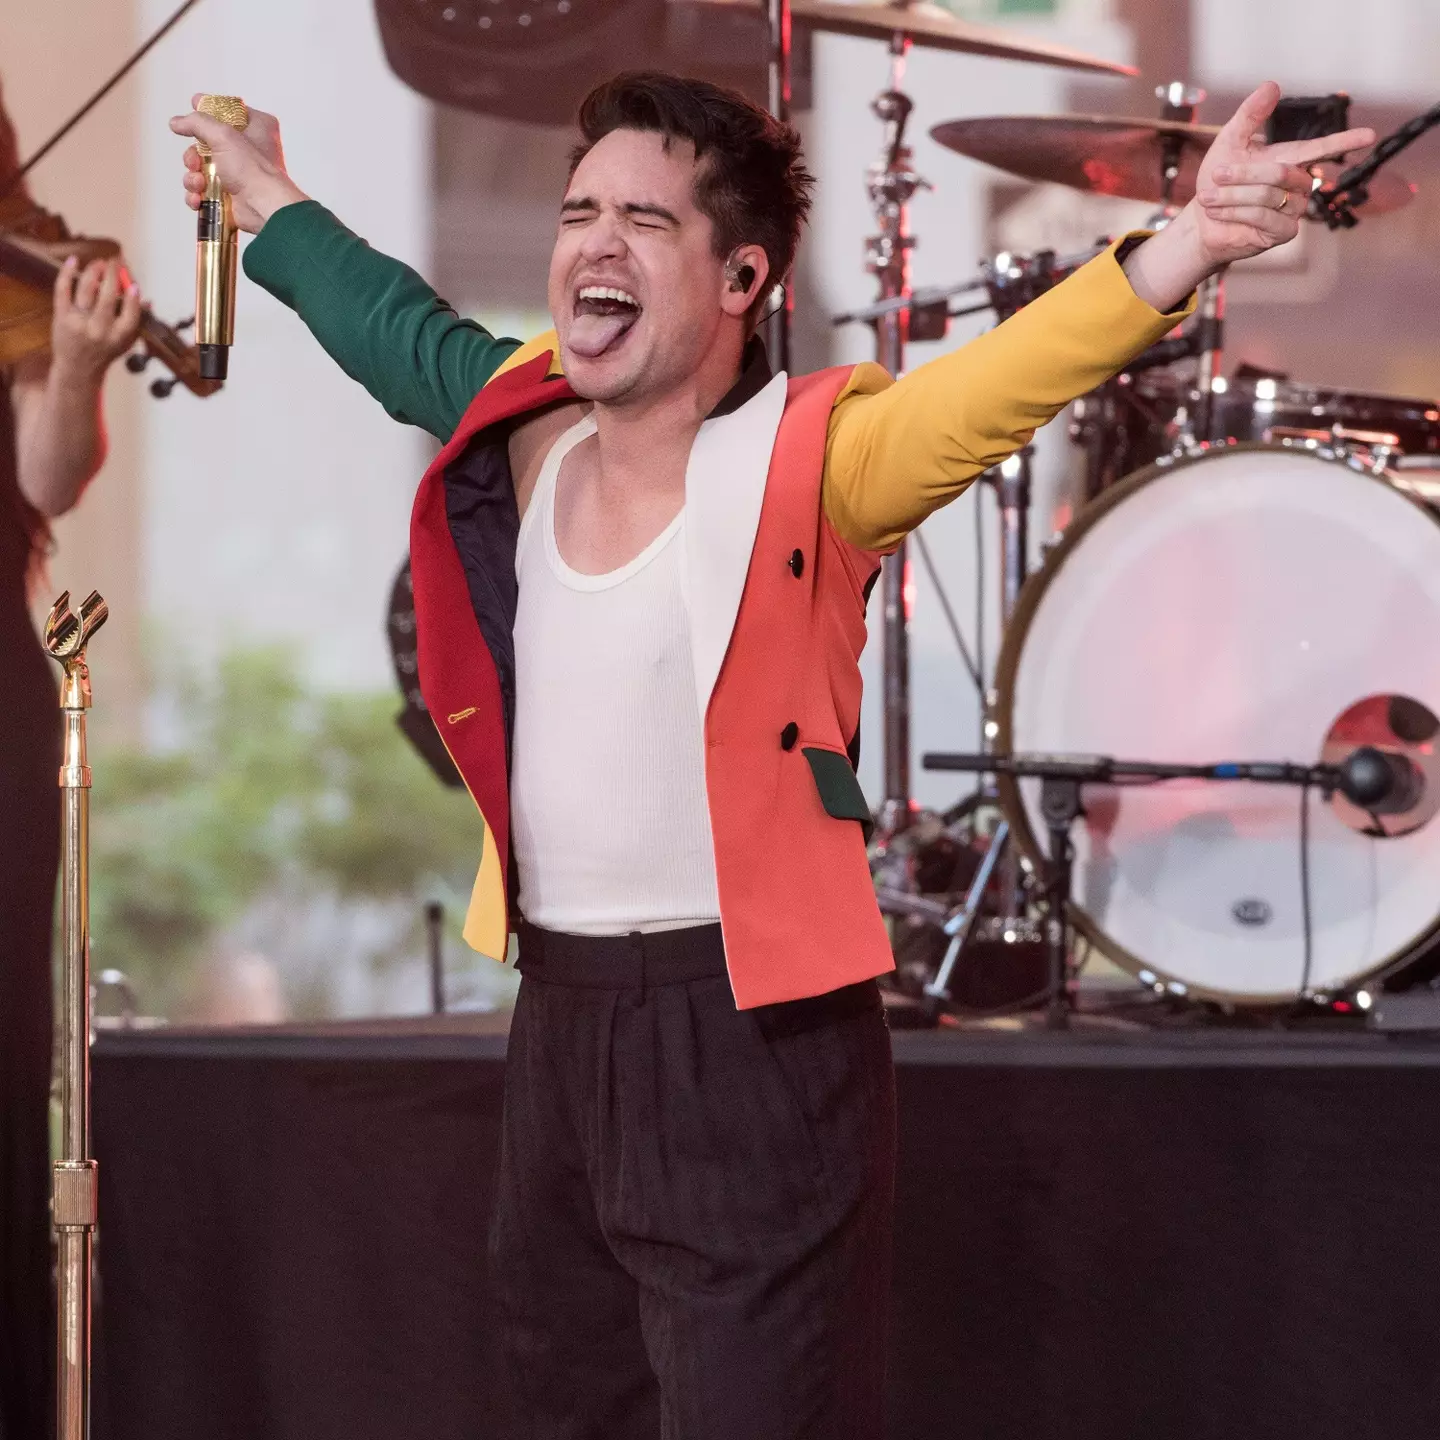 Panic! At The Disco were performing in Minnesota when a fire broke out onstage.